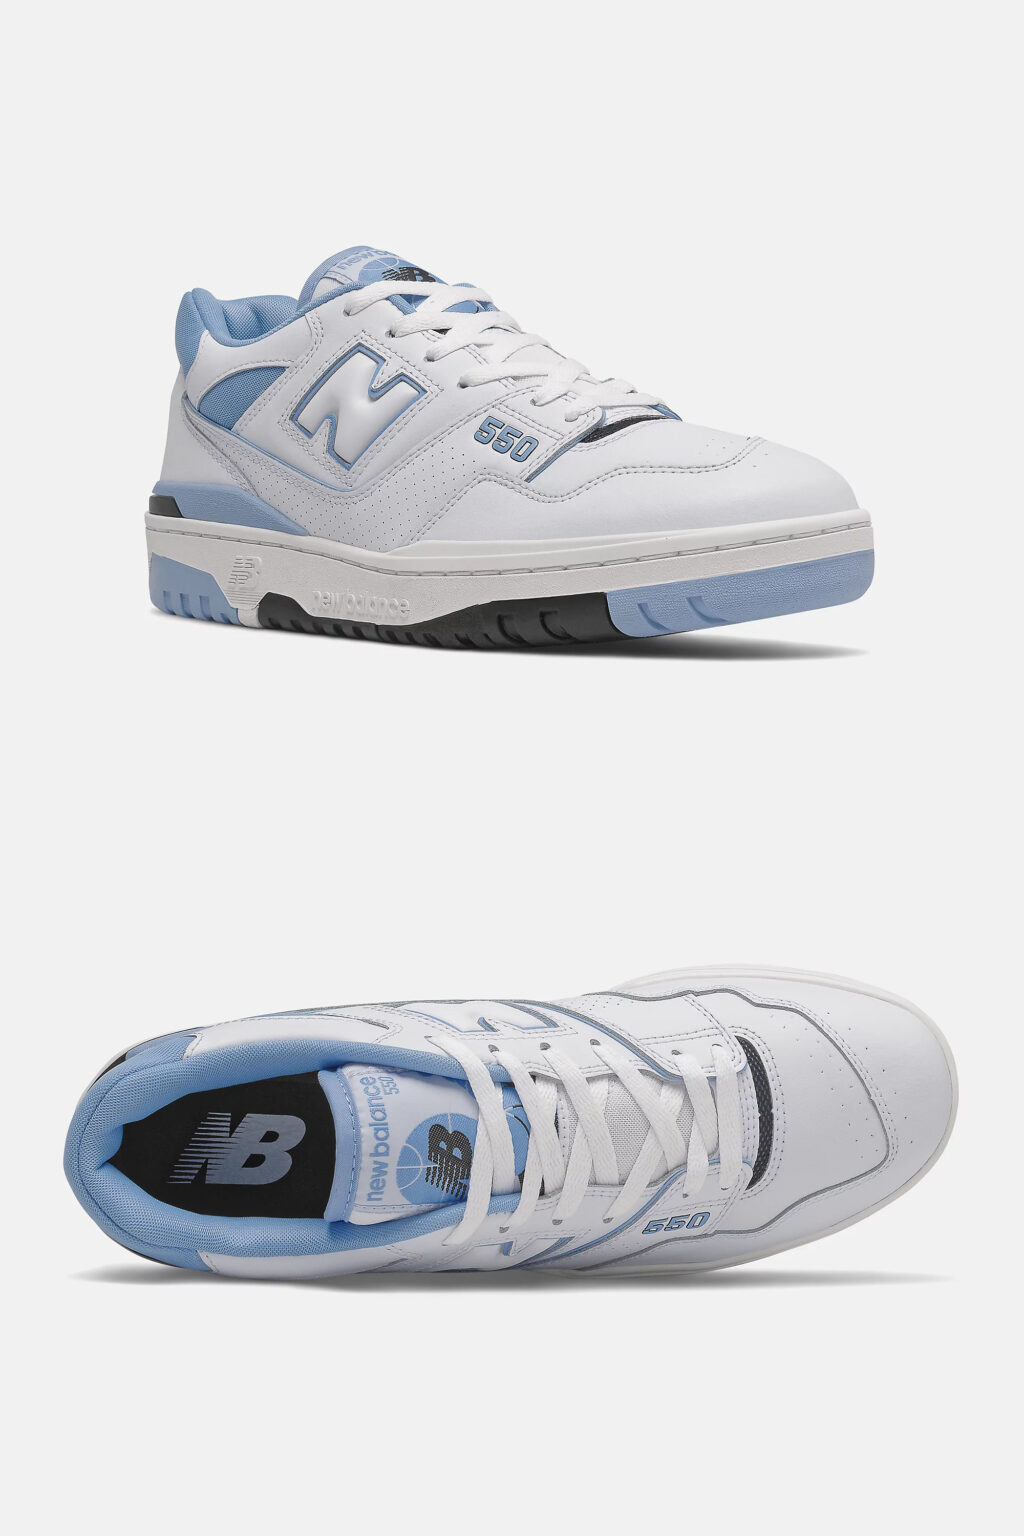 New Balance 550 – UNC | sneakerb0b RELEASES